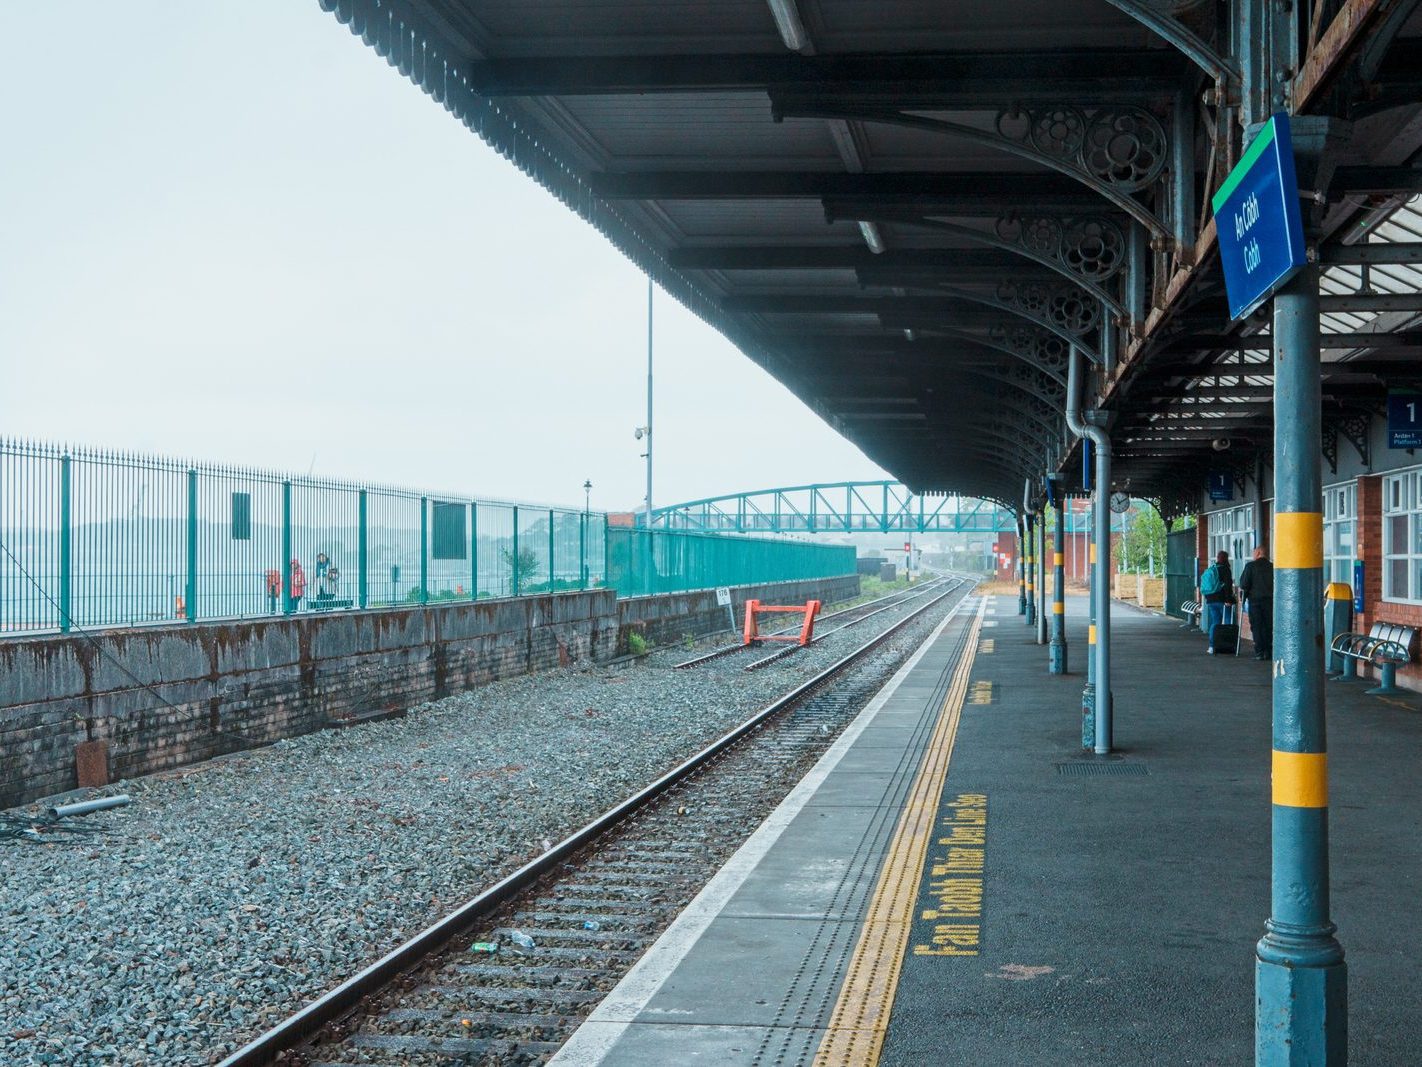 COBH RAILWAY STATION [COBH IS PRONOUNCED AS COVE] 006